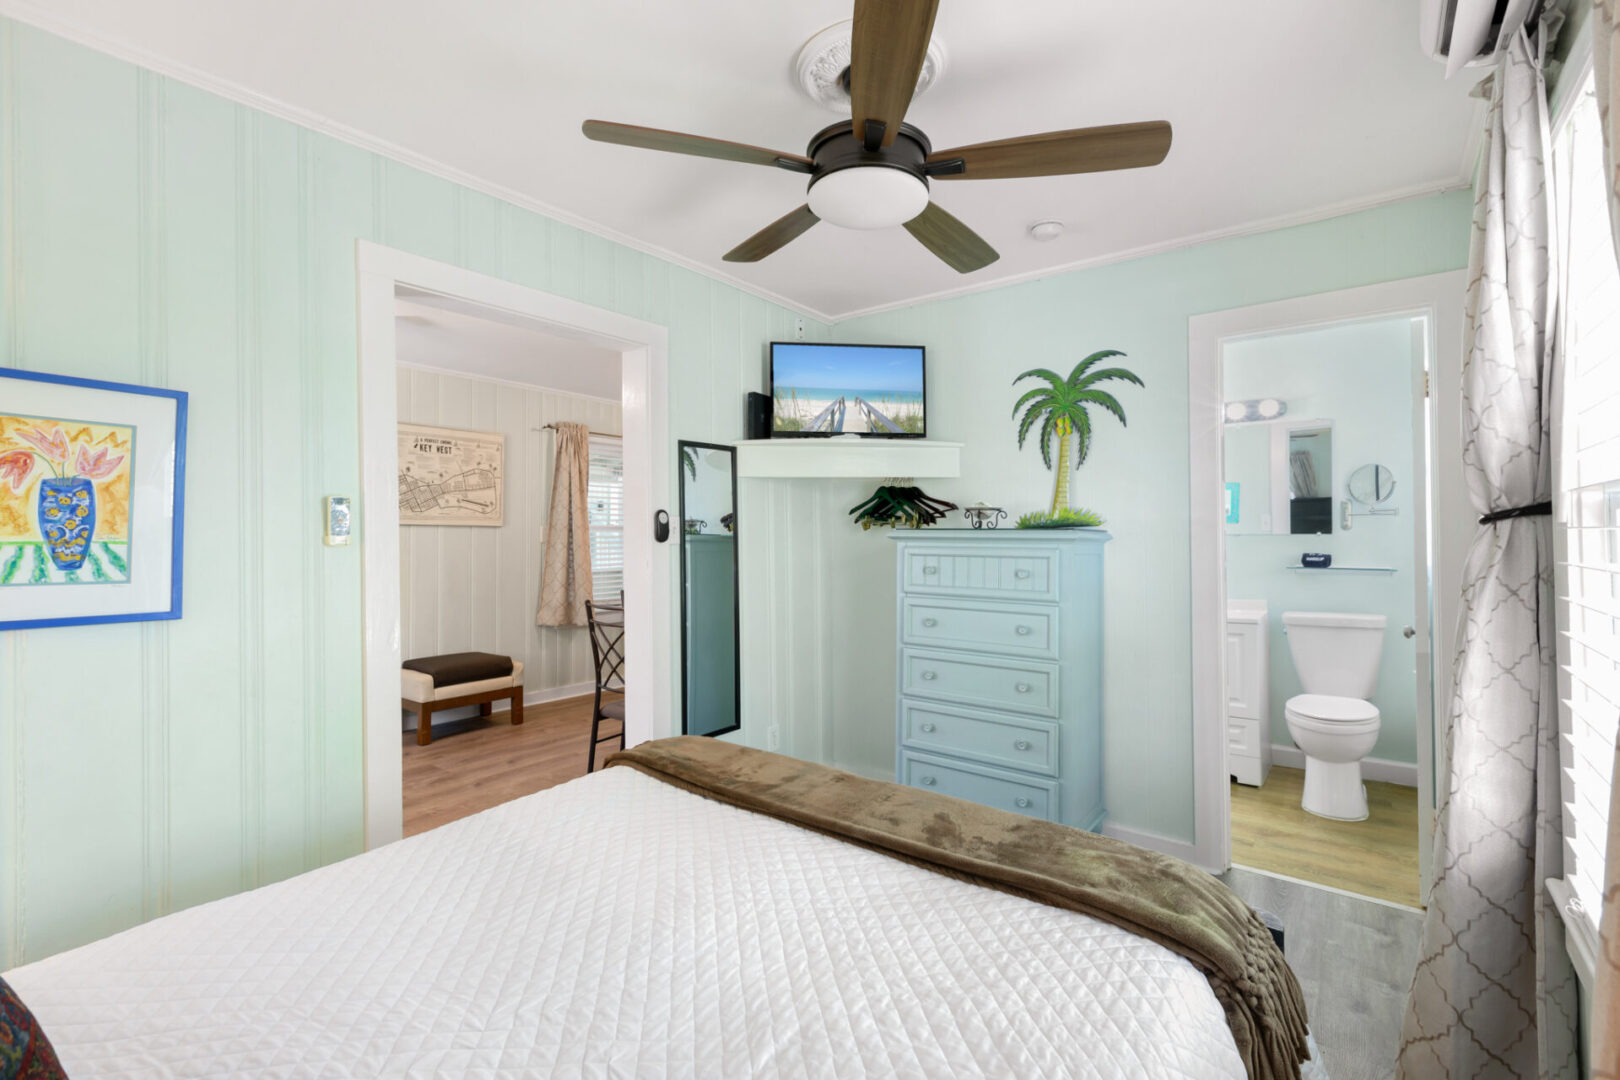 A bedroom with a tropical theme